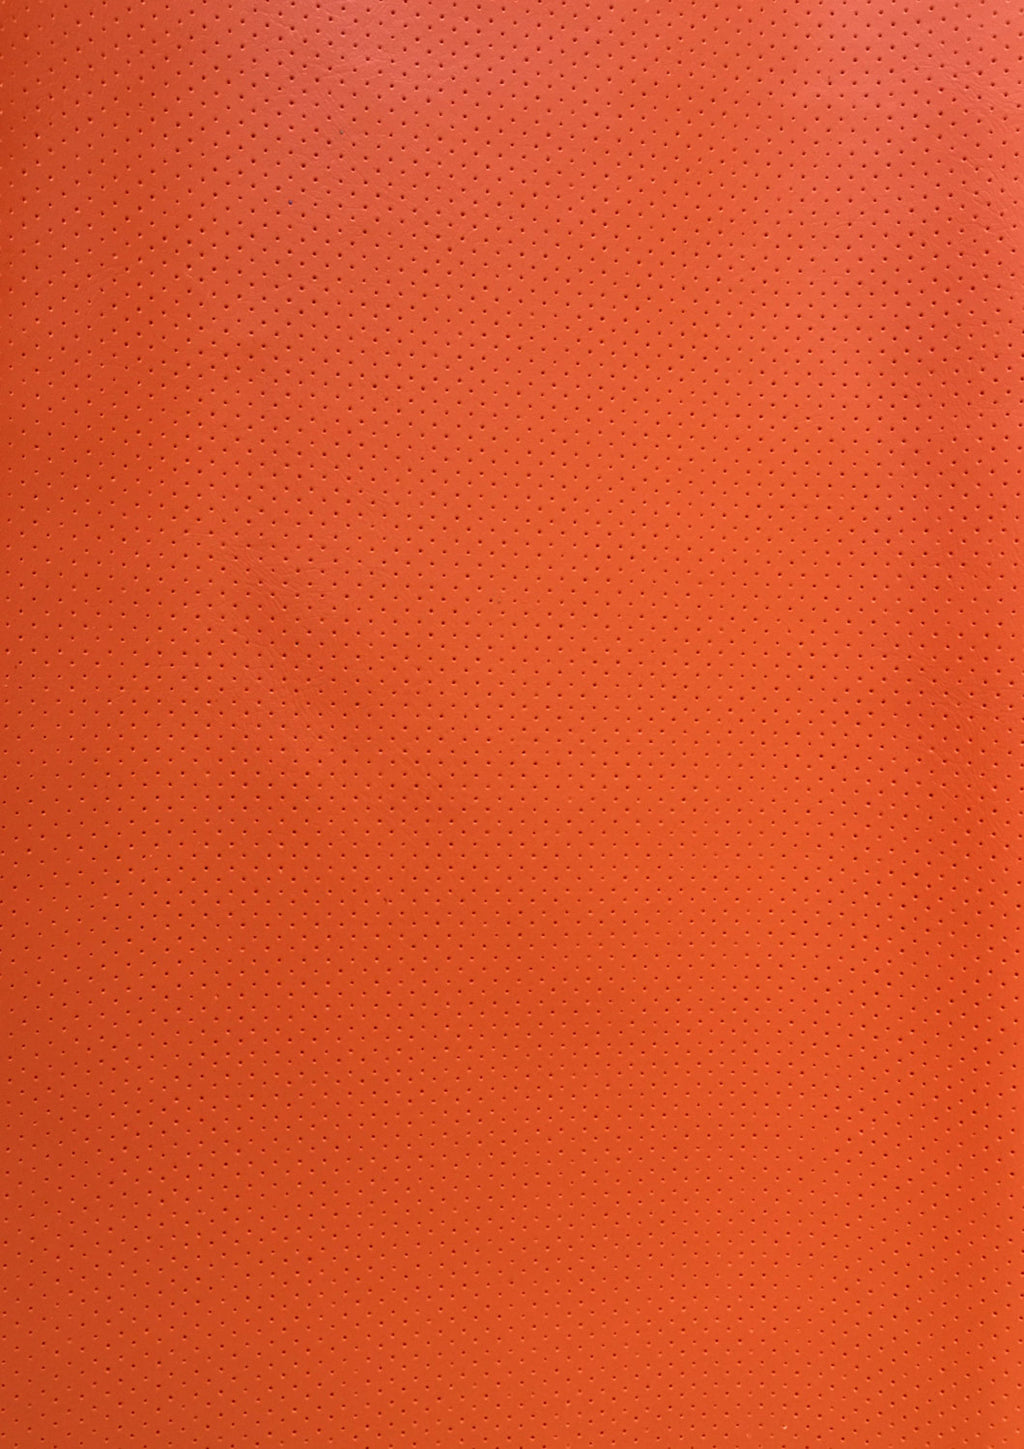 orange-perforated-faux-leather-vinyl-55-wide-marine-grade-upholstery-fabric-by-the-yard